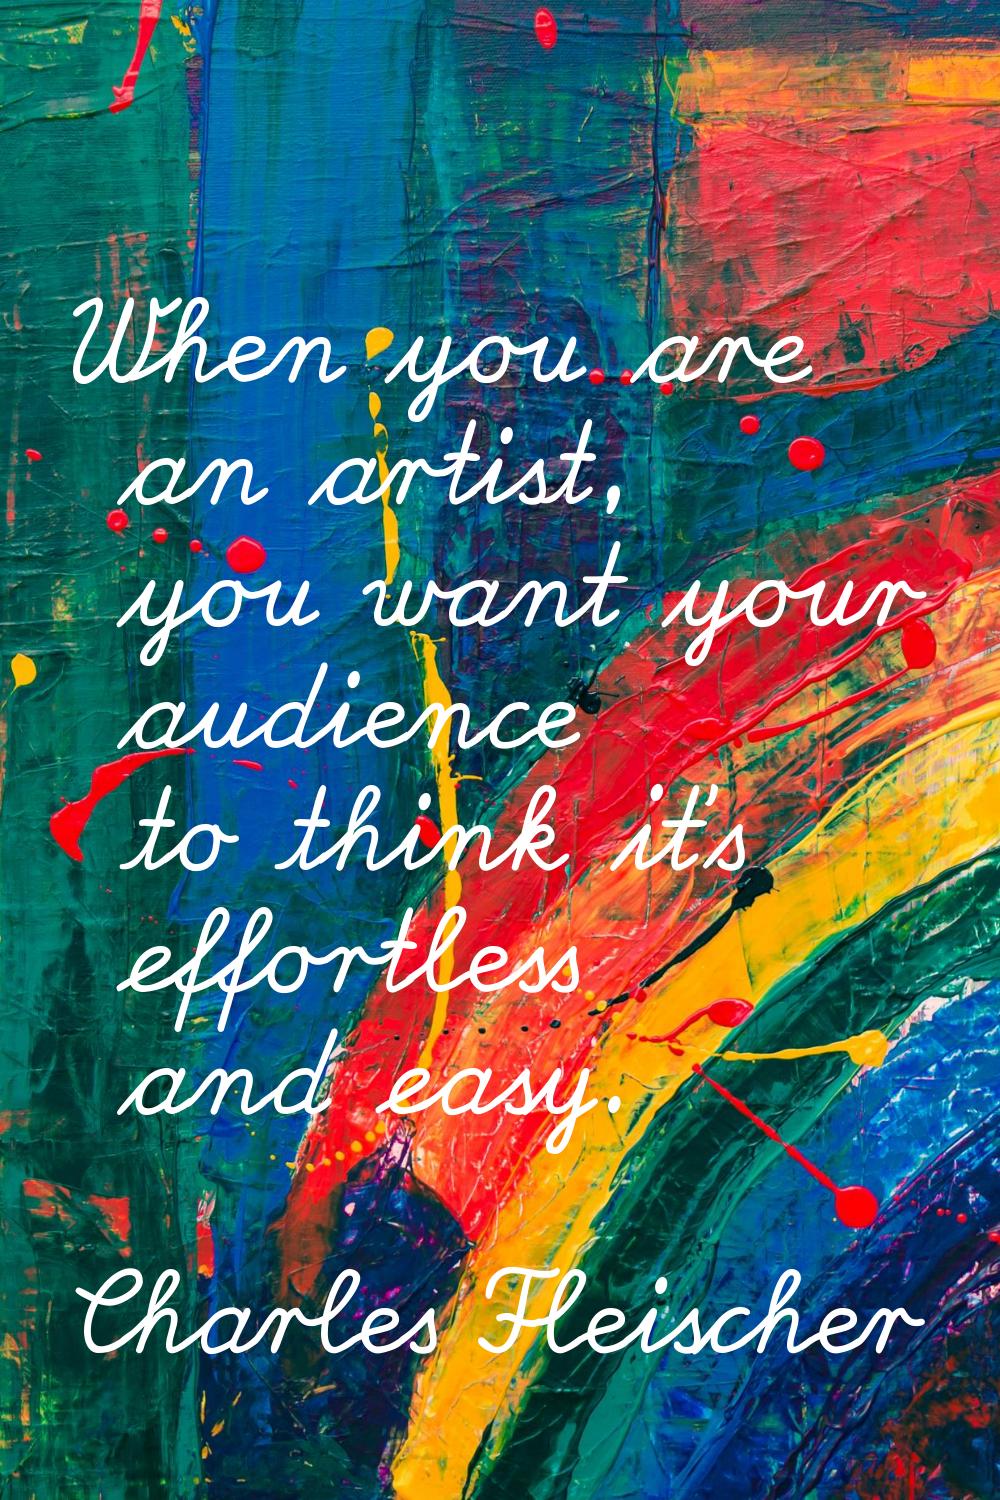 When you are an artist, you want your audience to think it's effortless and easy.